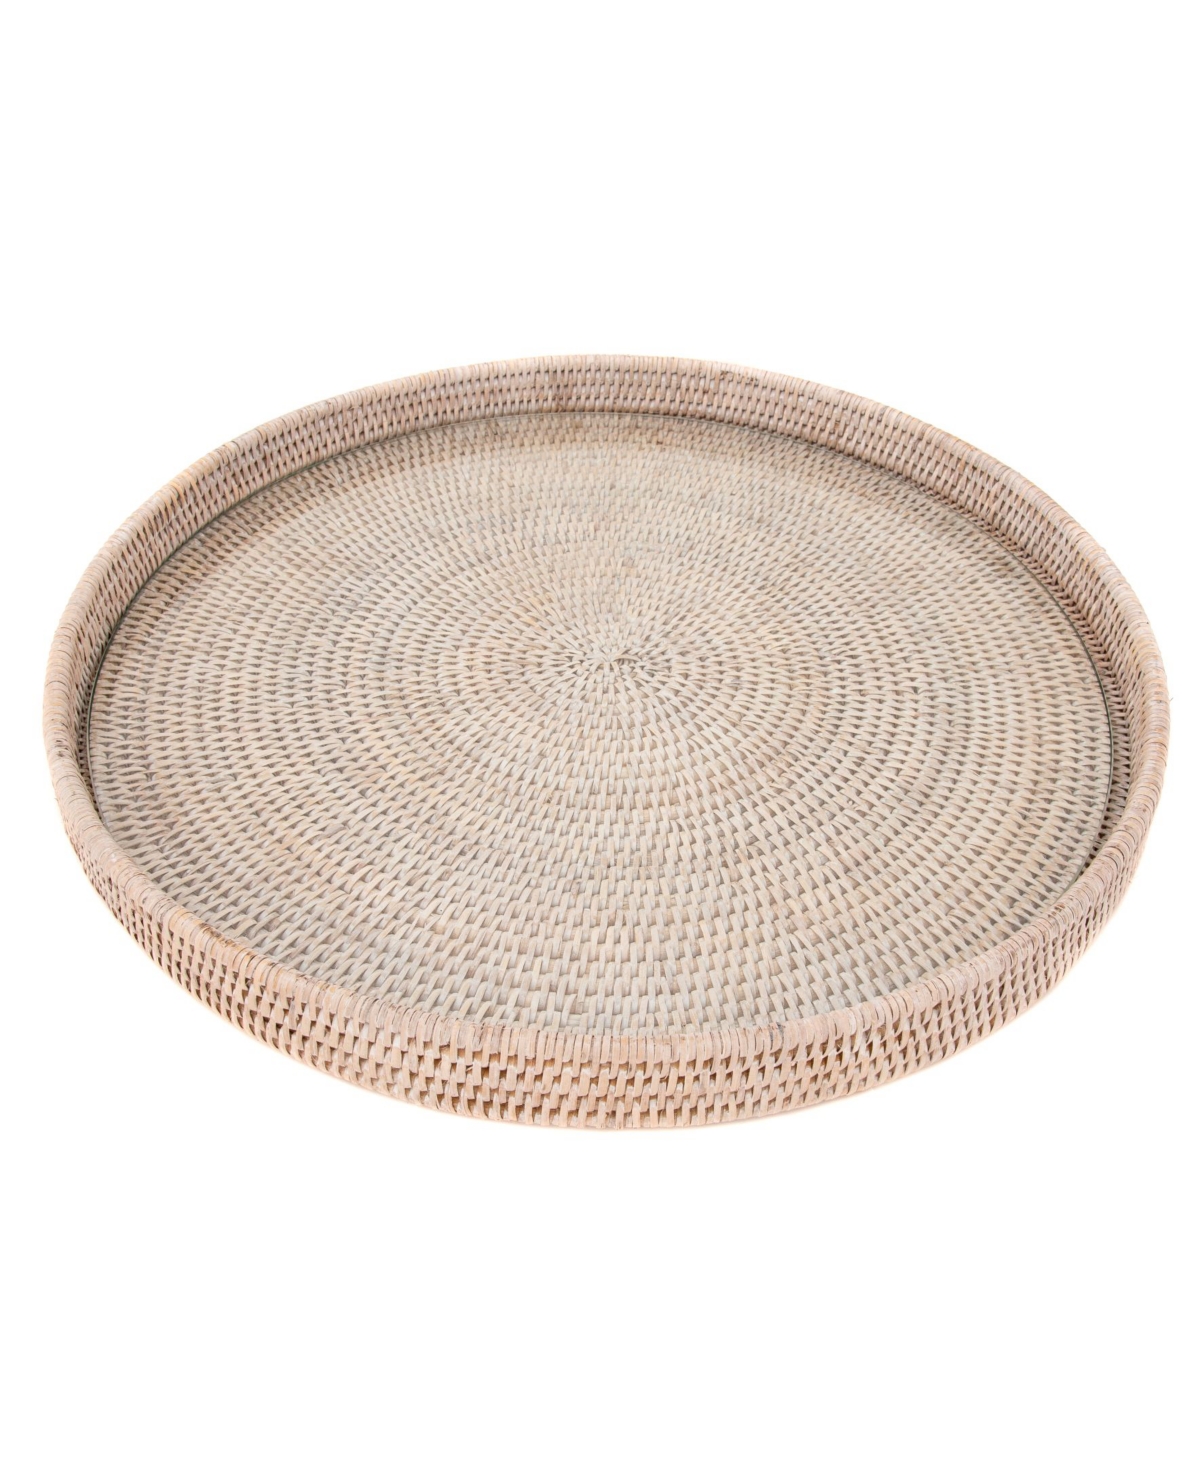 Artifacts Trading Company Artifacts Rattan Round Serving-ottoman Tray With Glass Insert In Open White